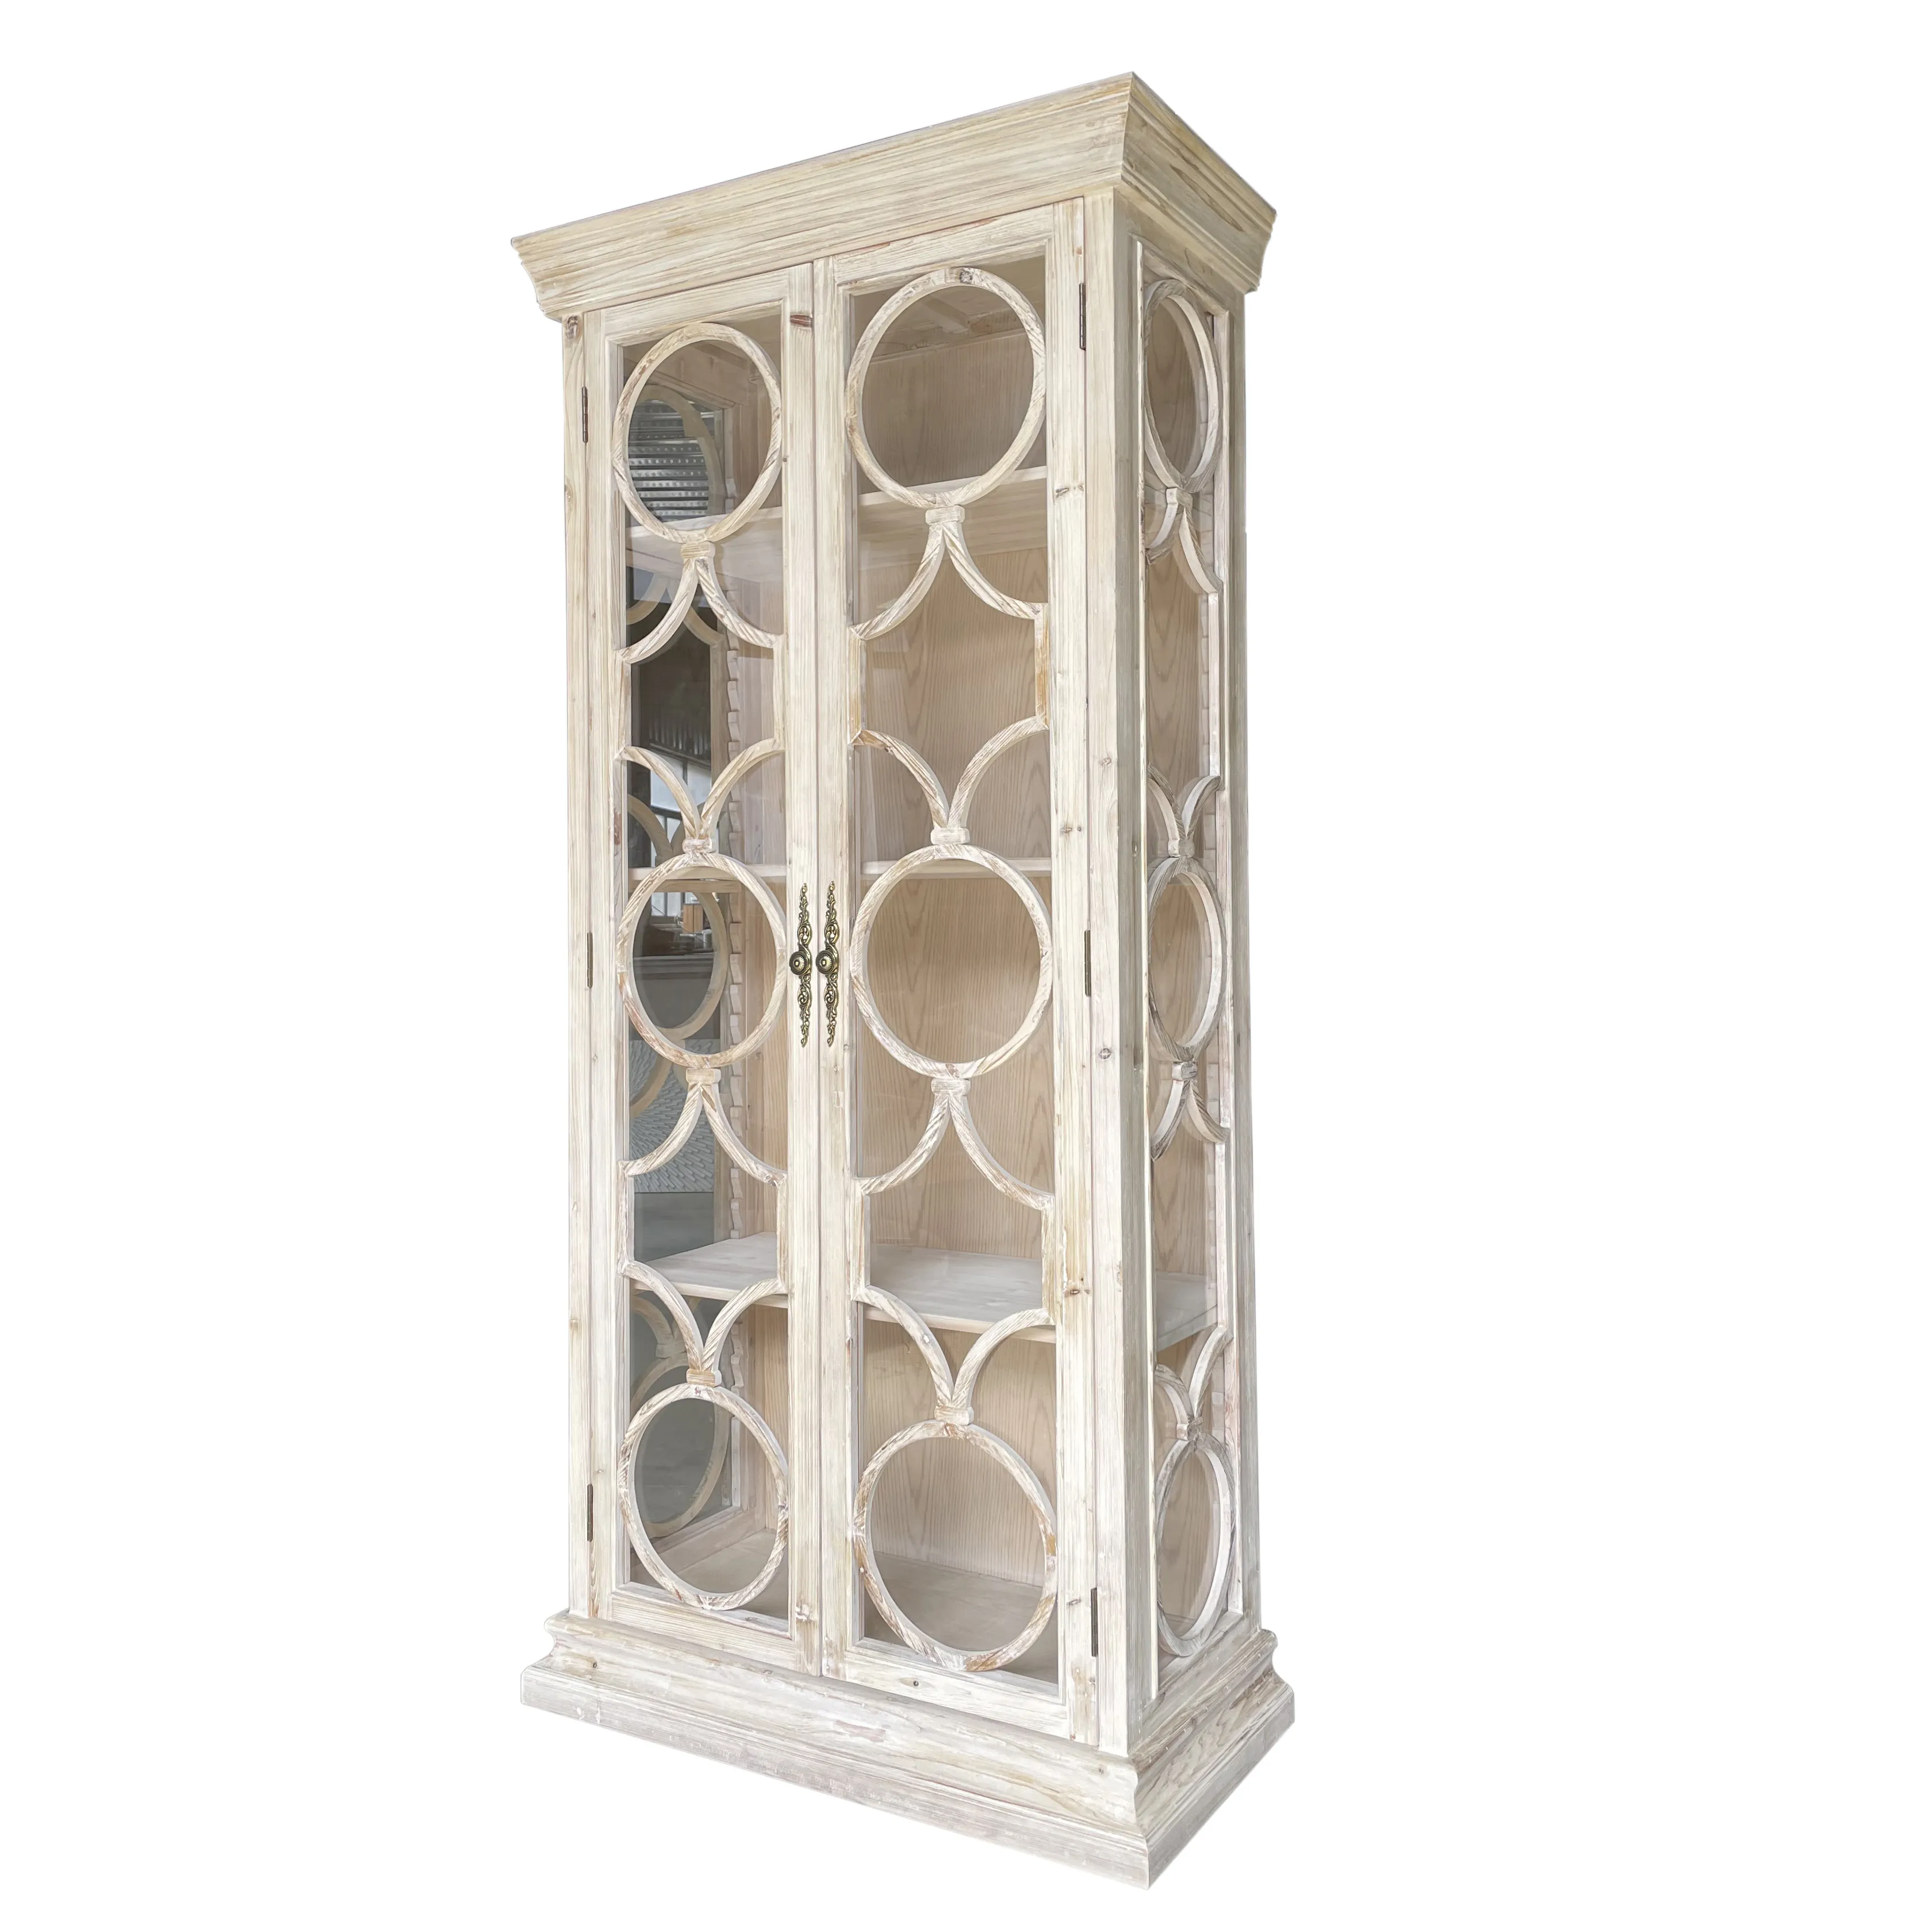 Antique wash white 2 door bookcases display reclaimed wood caspian single storage tall cabinet